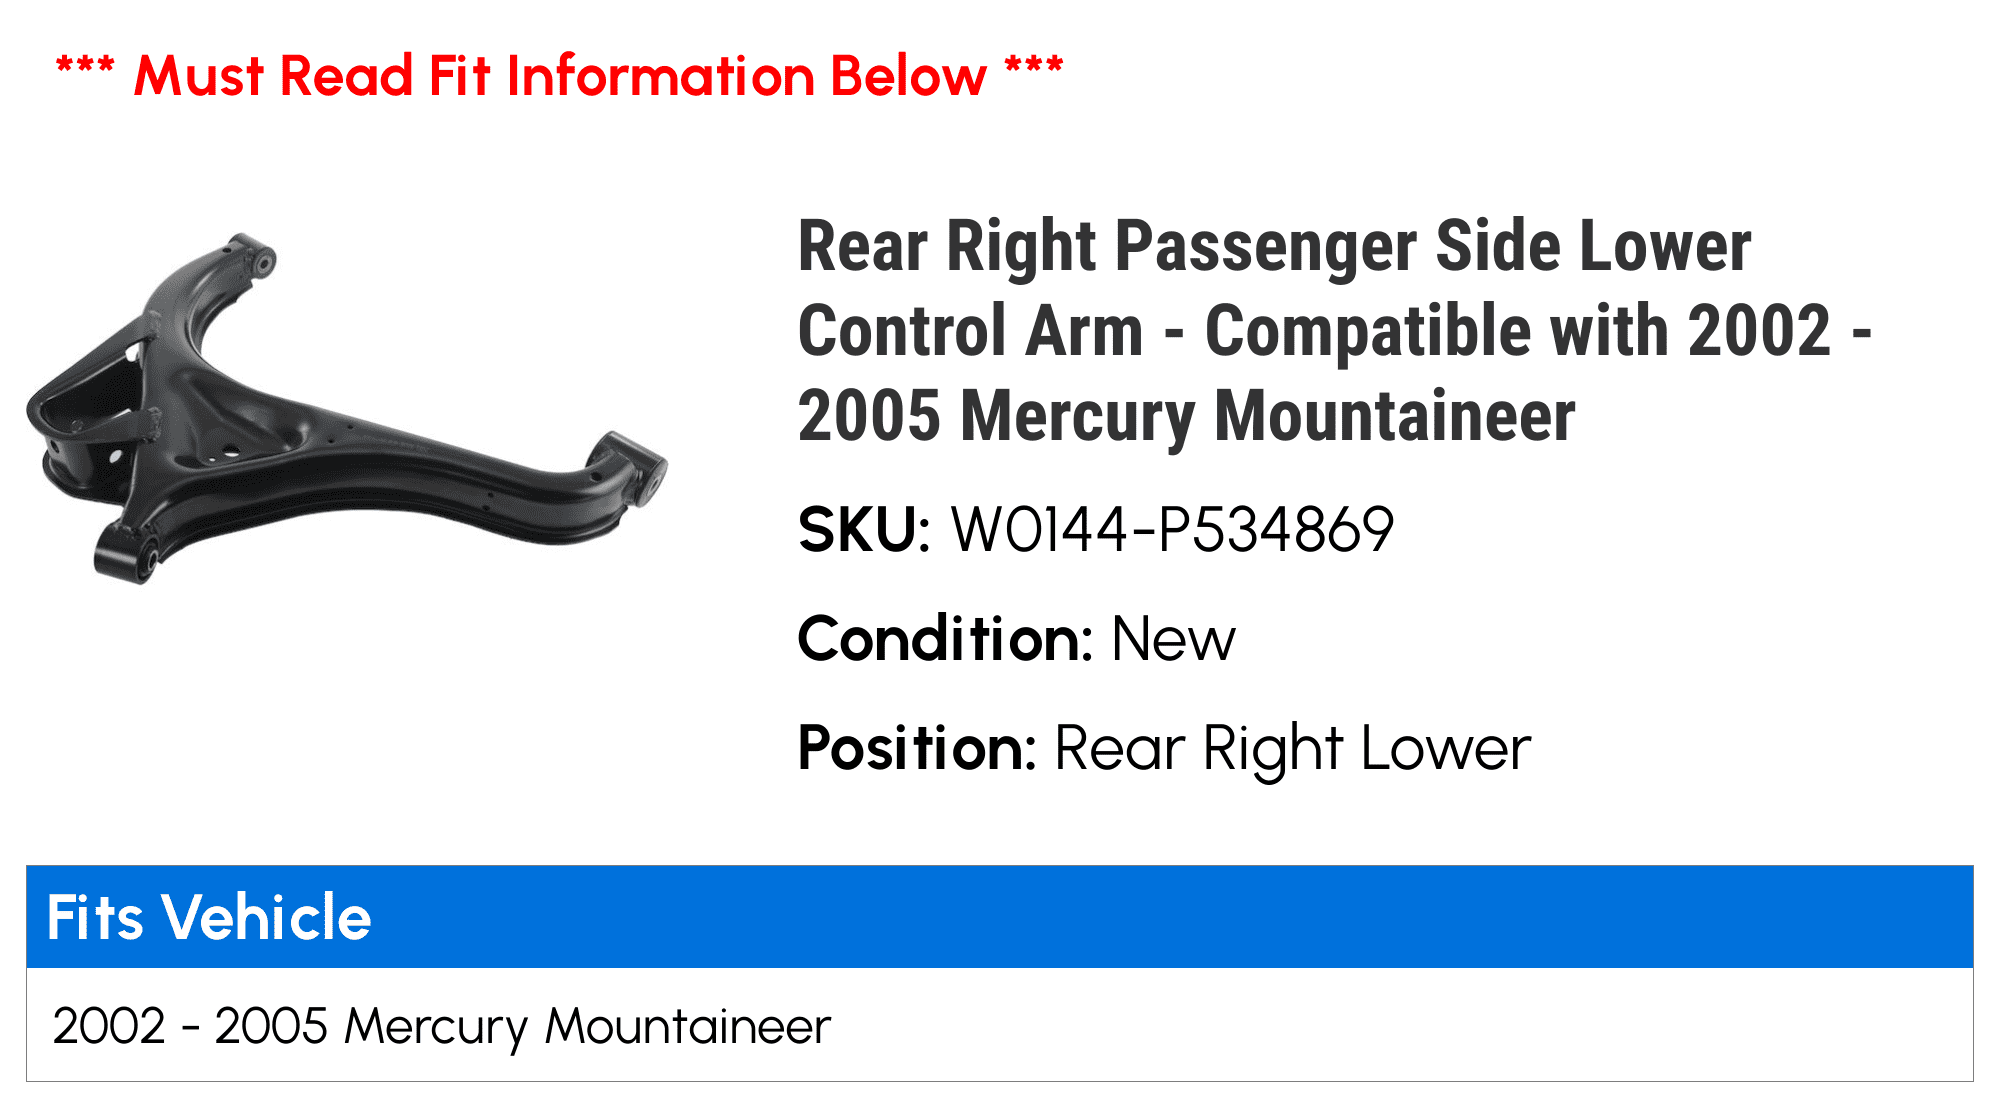 Rear Right Lower Control Arm For 2002-2005 Mercury Mountaineer 2003 2004 C711VY 